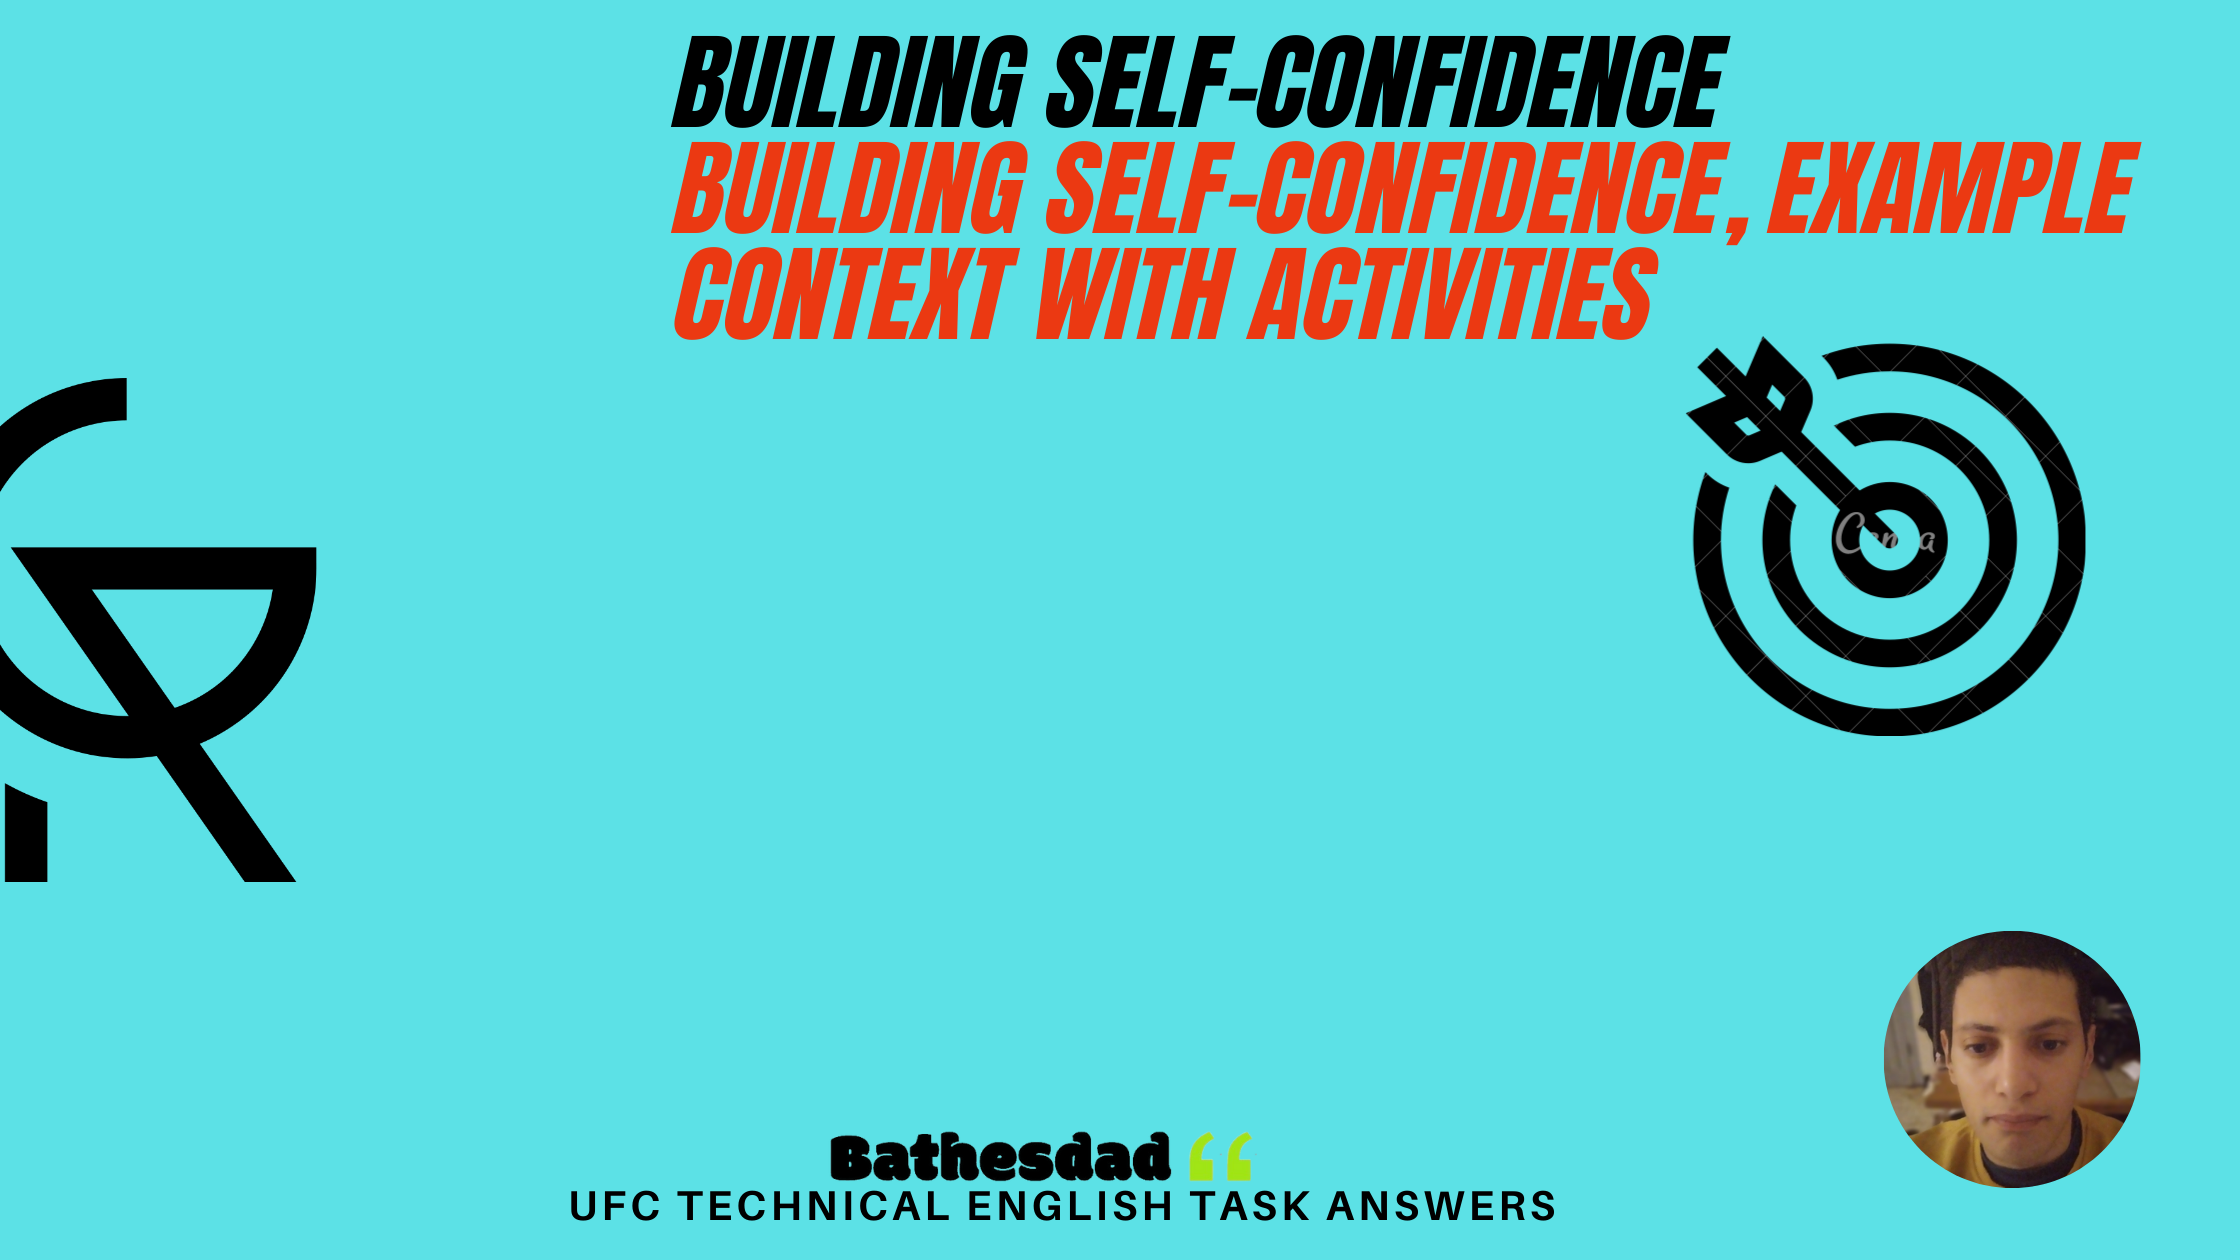 Building Self-Confidence, example context with activities